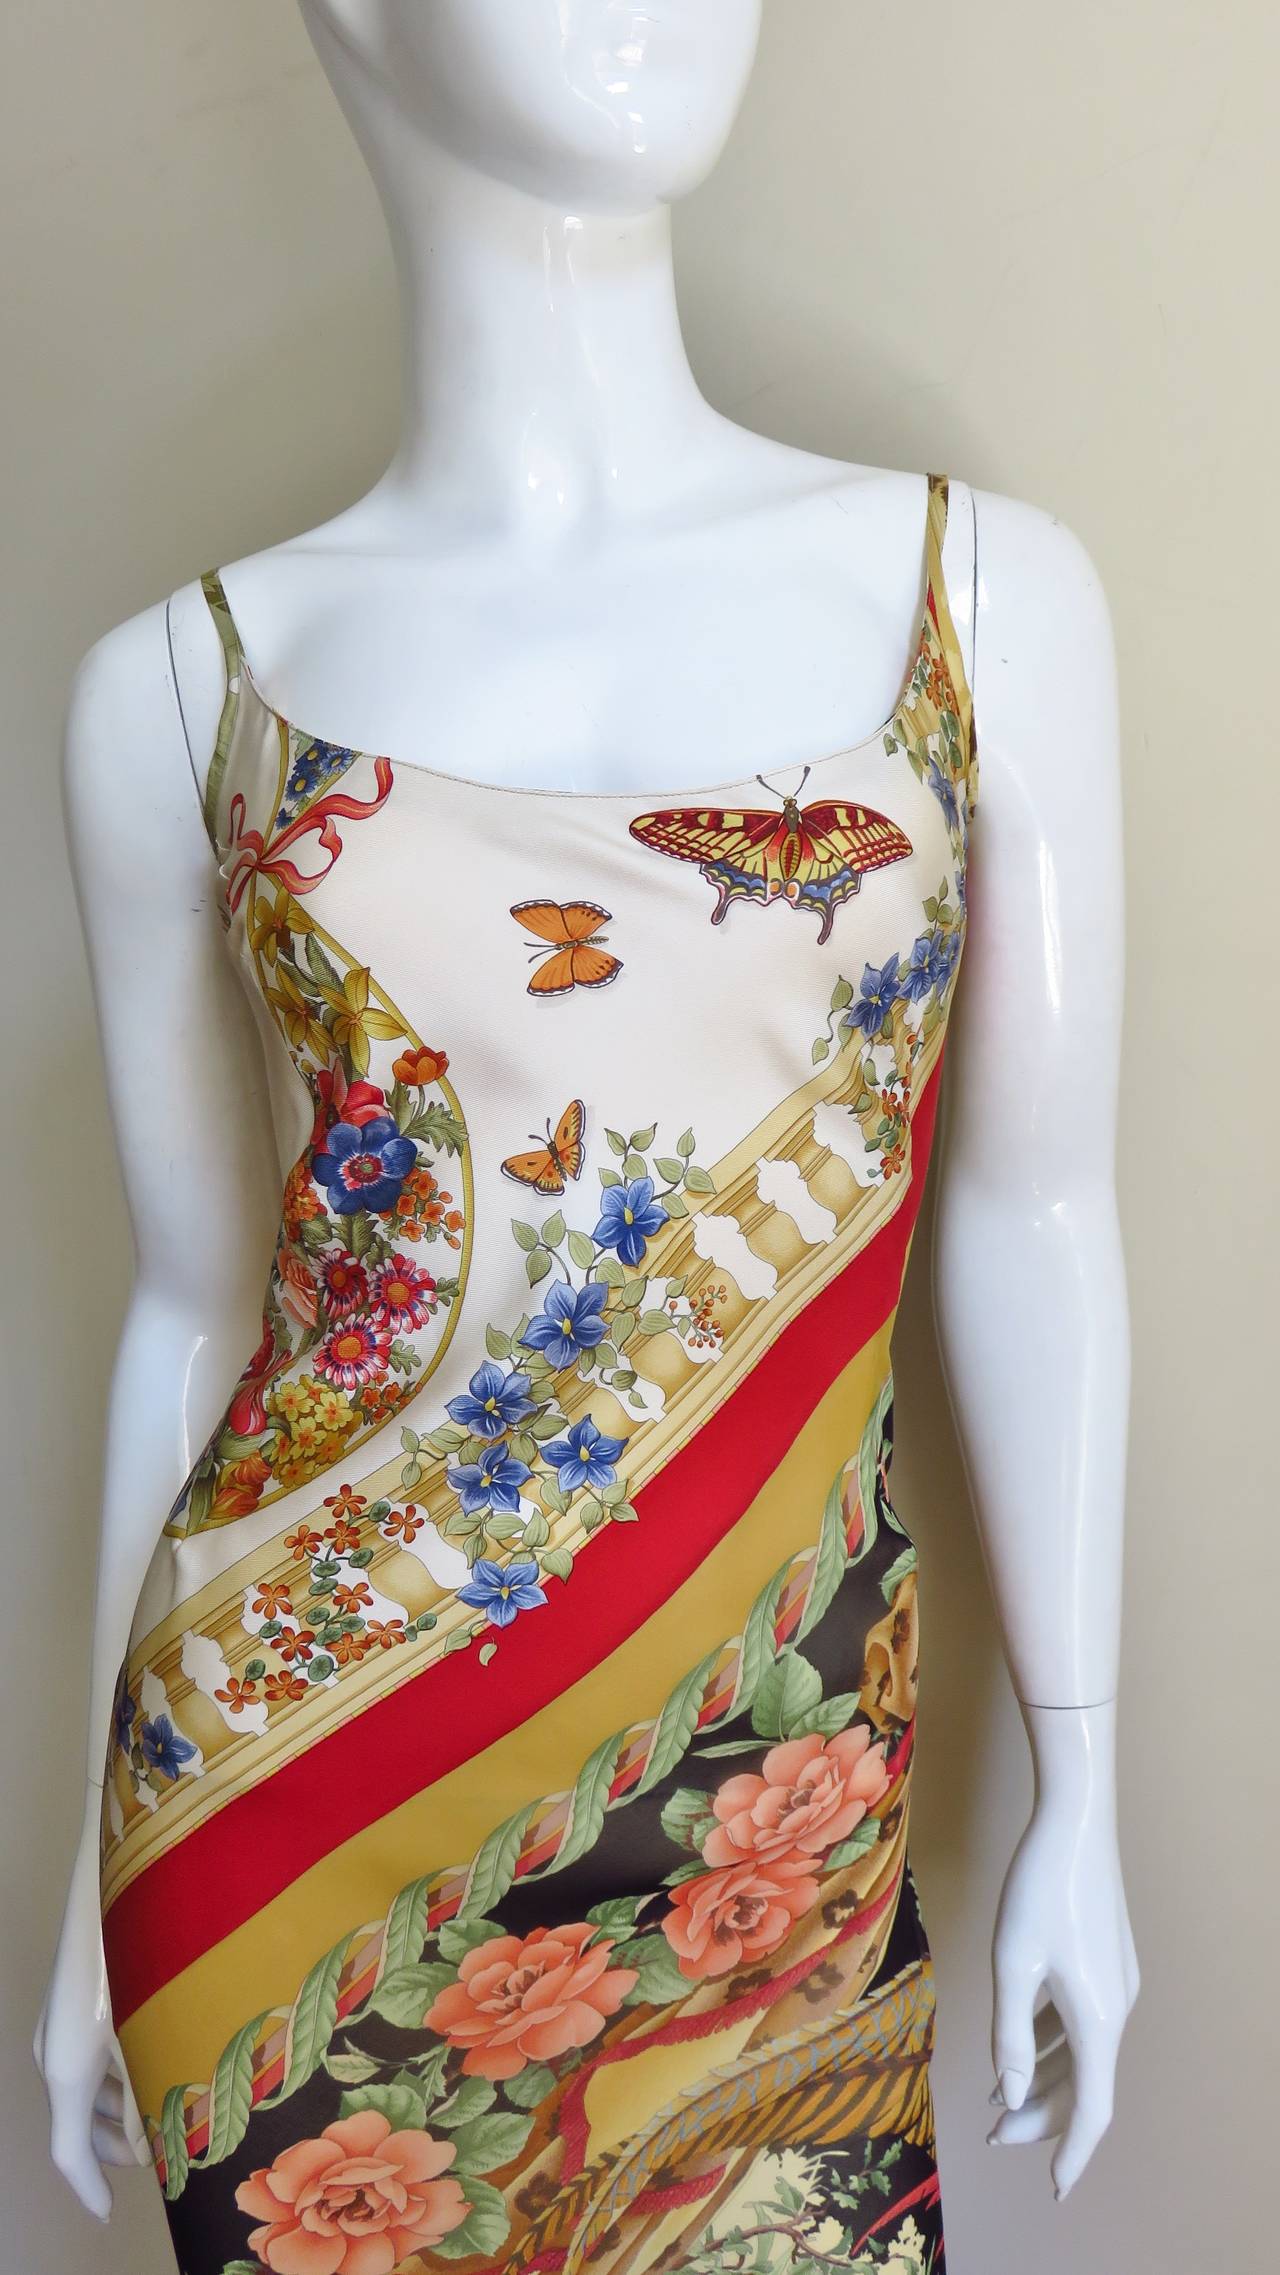 A beautiful silk dress from Italian designer Salvatore Ferragamo.  It is created with silk in a variety of patterns including a duck, flowers, birds and butterflies all intricately detailed and colorful.  It has spaghetti straps, trumpets slightly